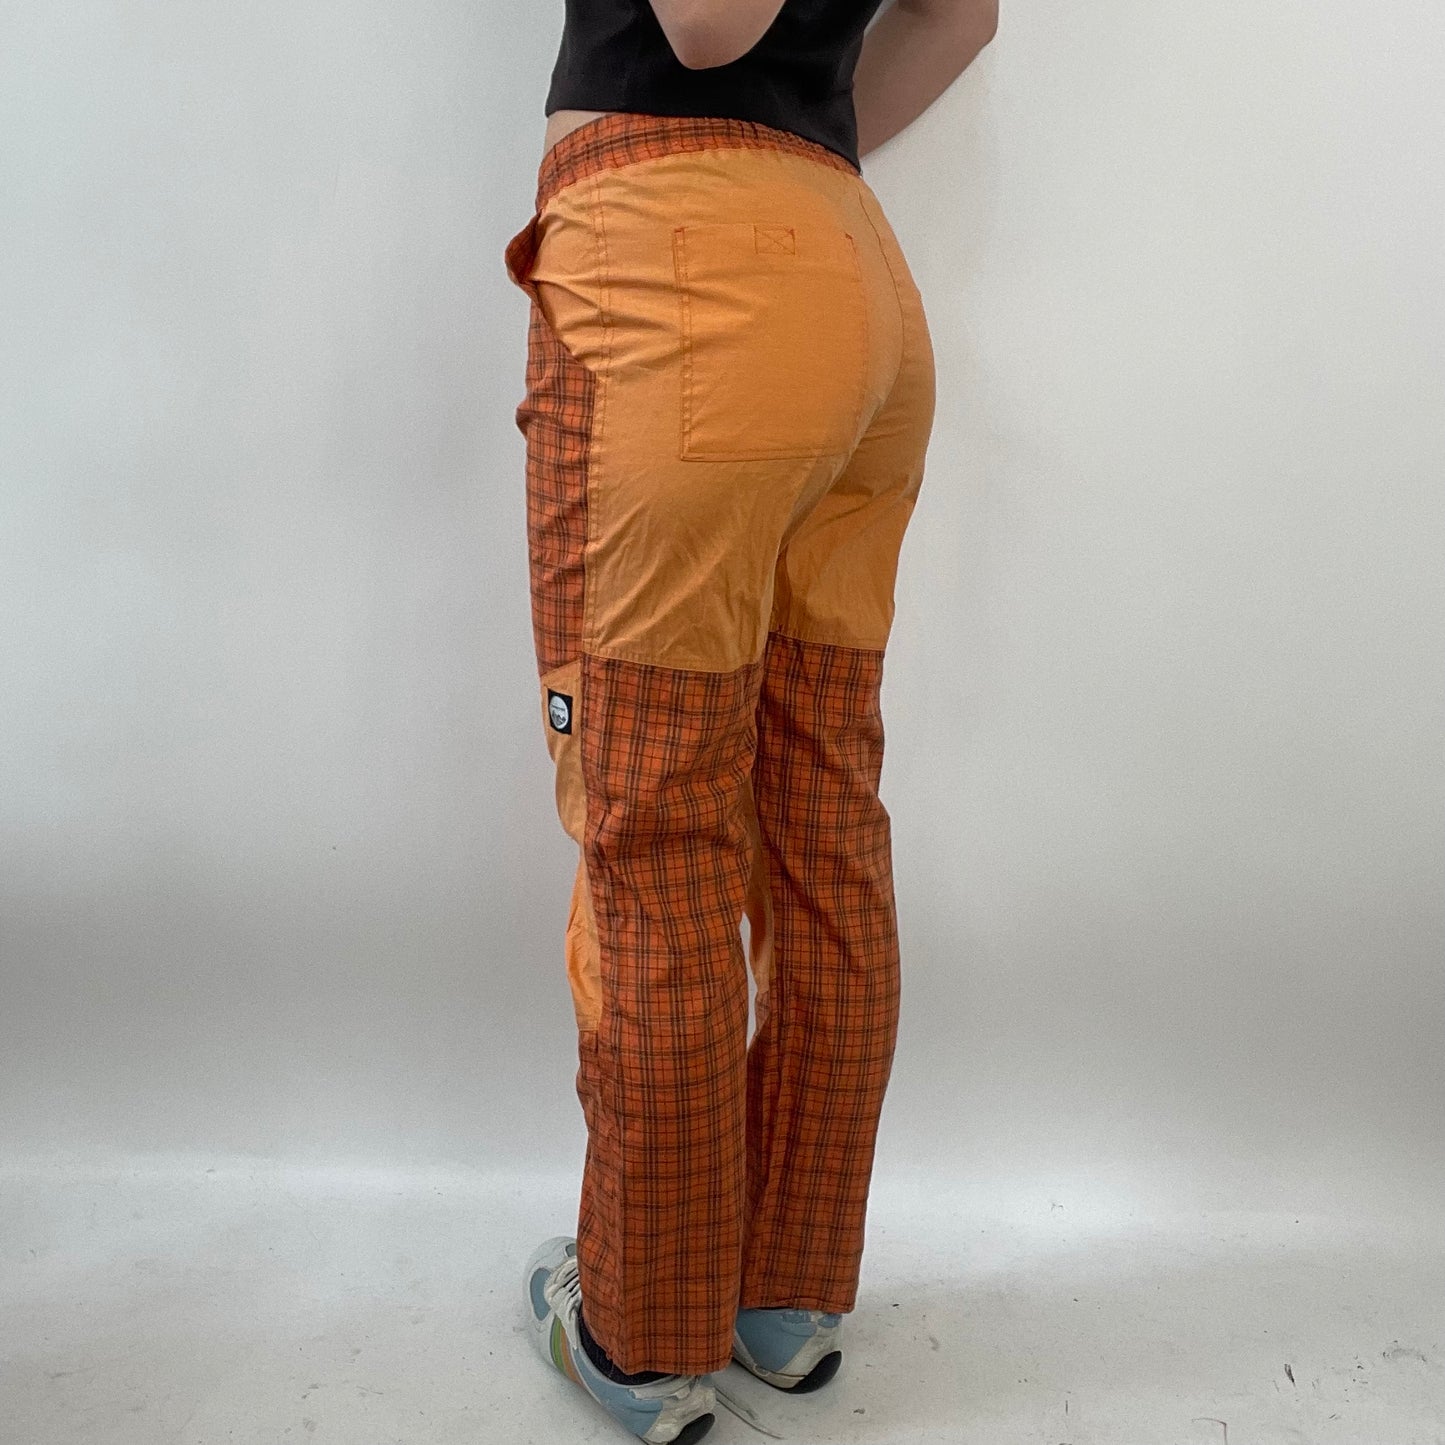 HIPPY CHIC DROP | small orange checked trousers with drawstring detail